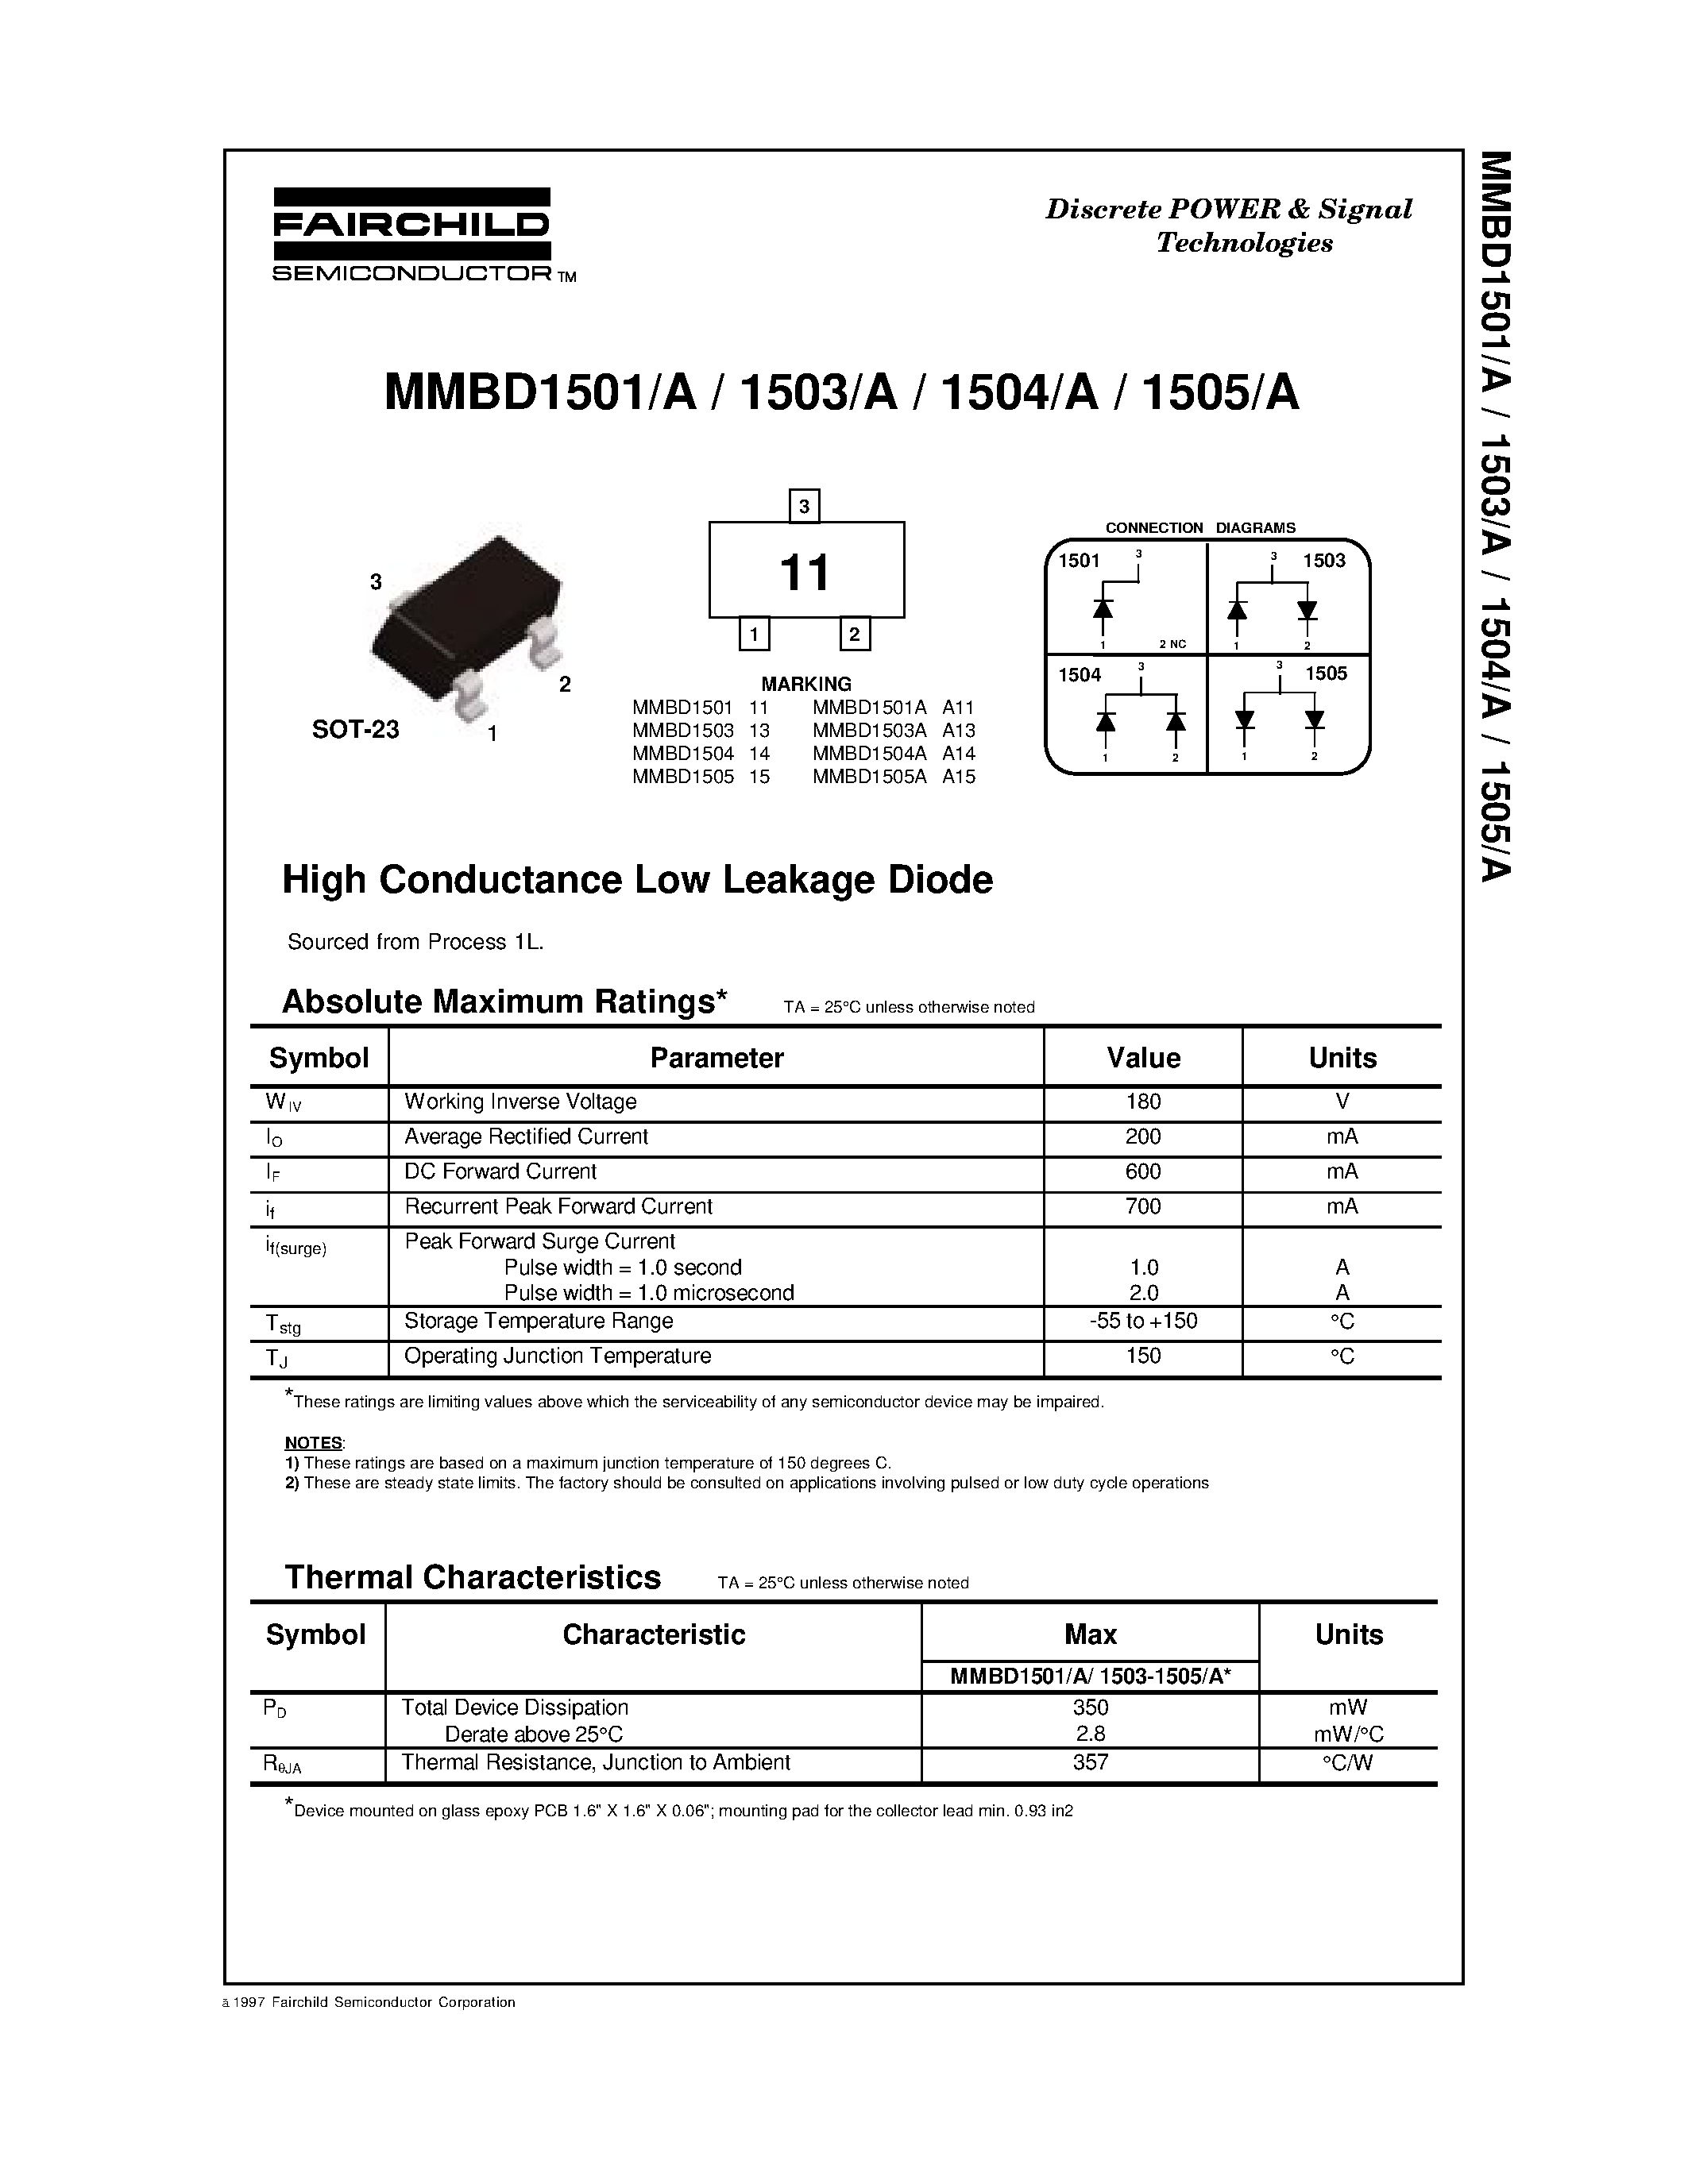 Datasheet MMBD1503 - High Conductance Low Leakage Diode page 1